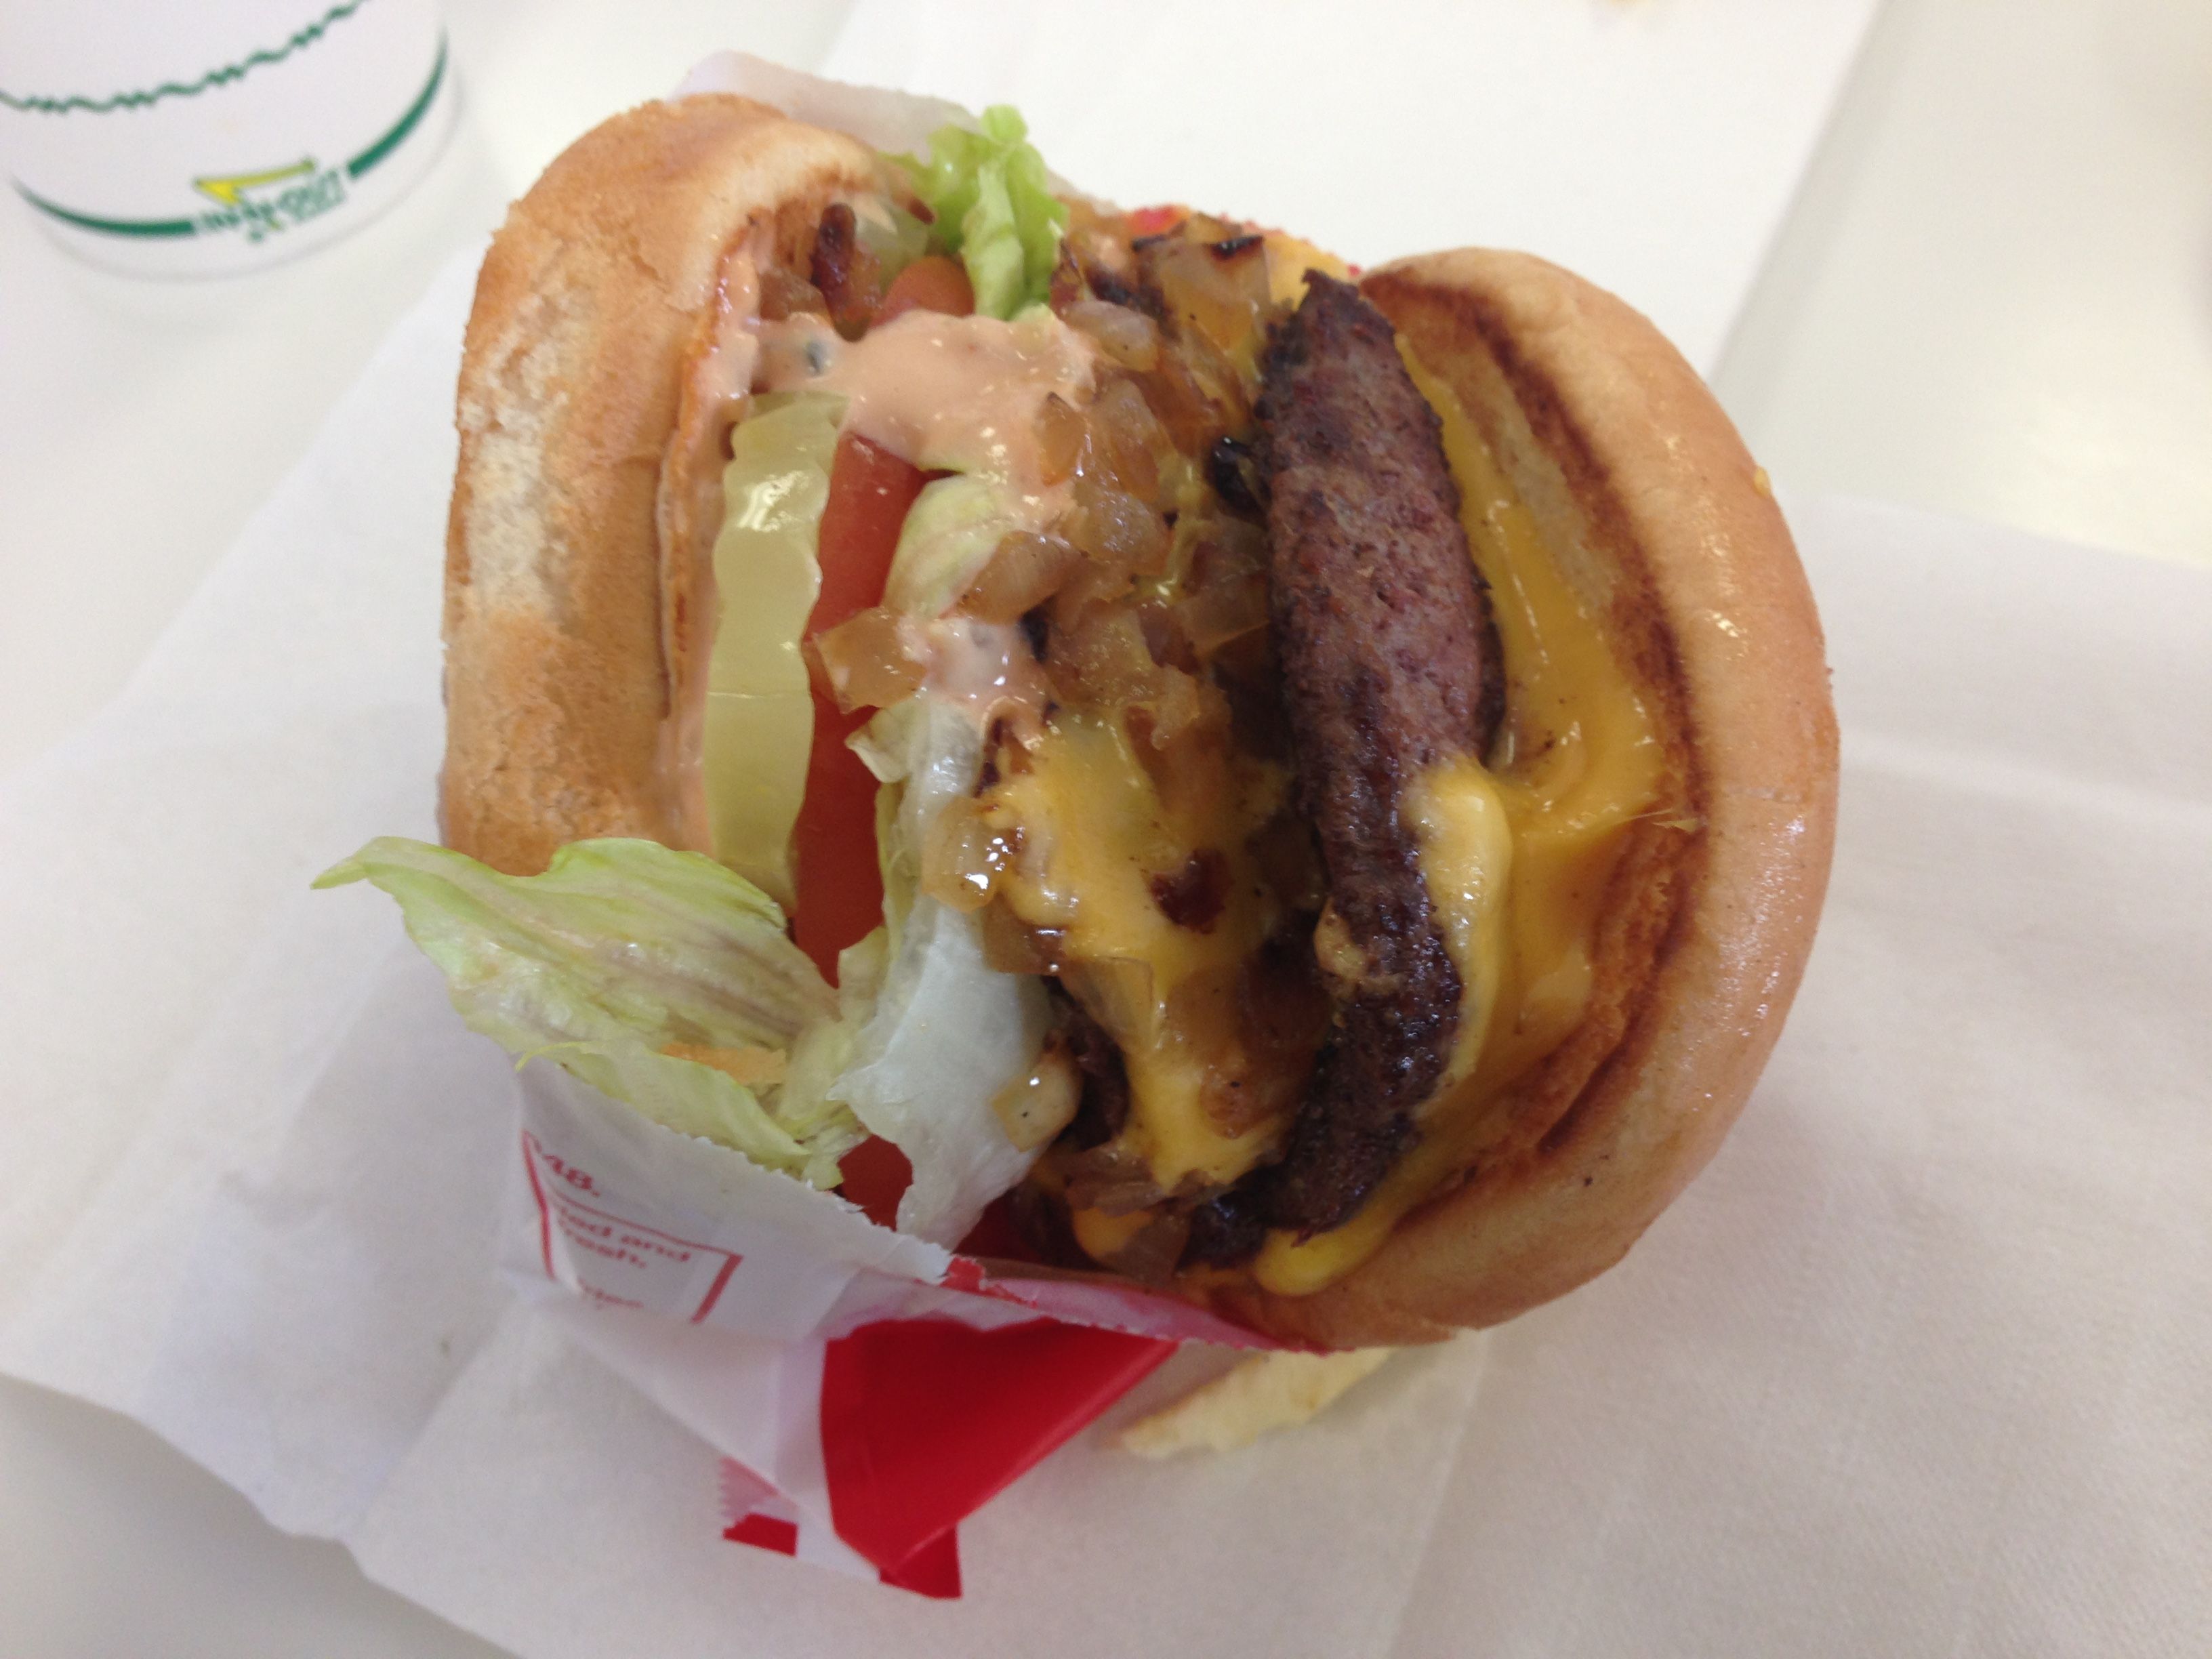 A photo of an In-N-Out Burger